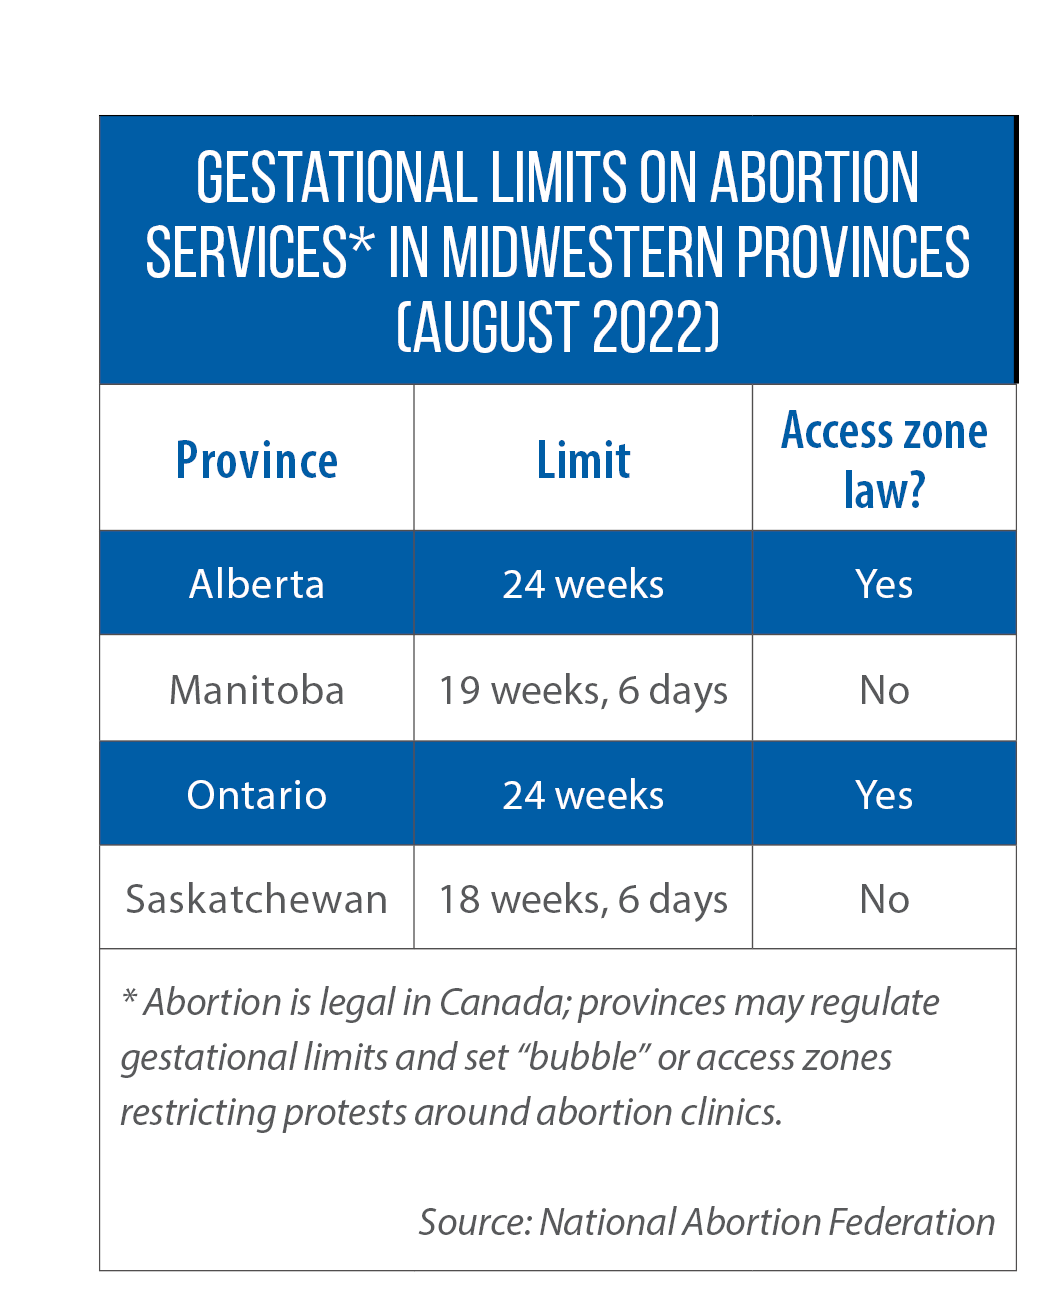 List of gestational limits on abortion services in Midwestern provinces as of August 2022